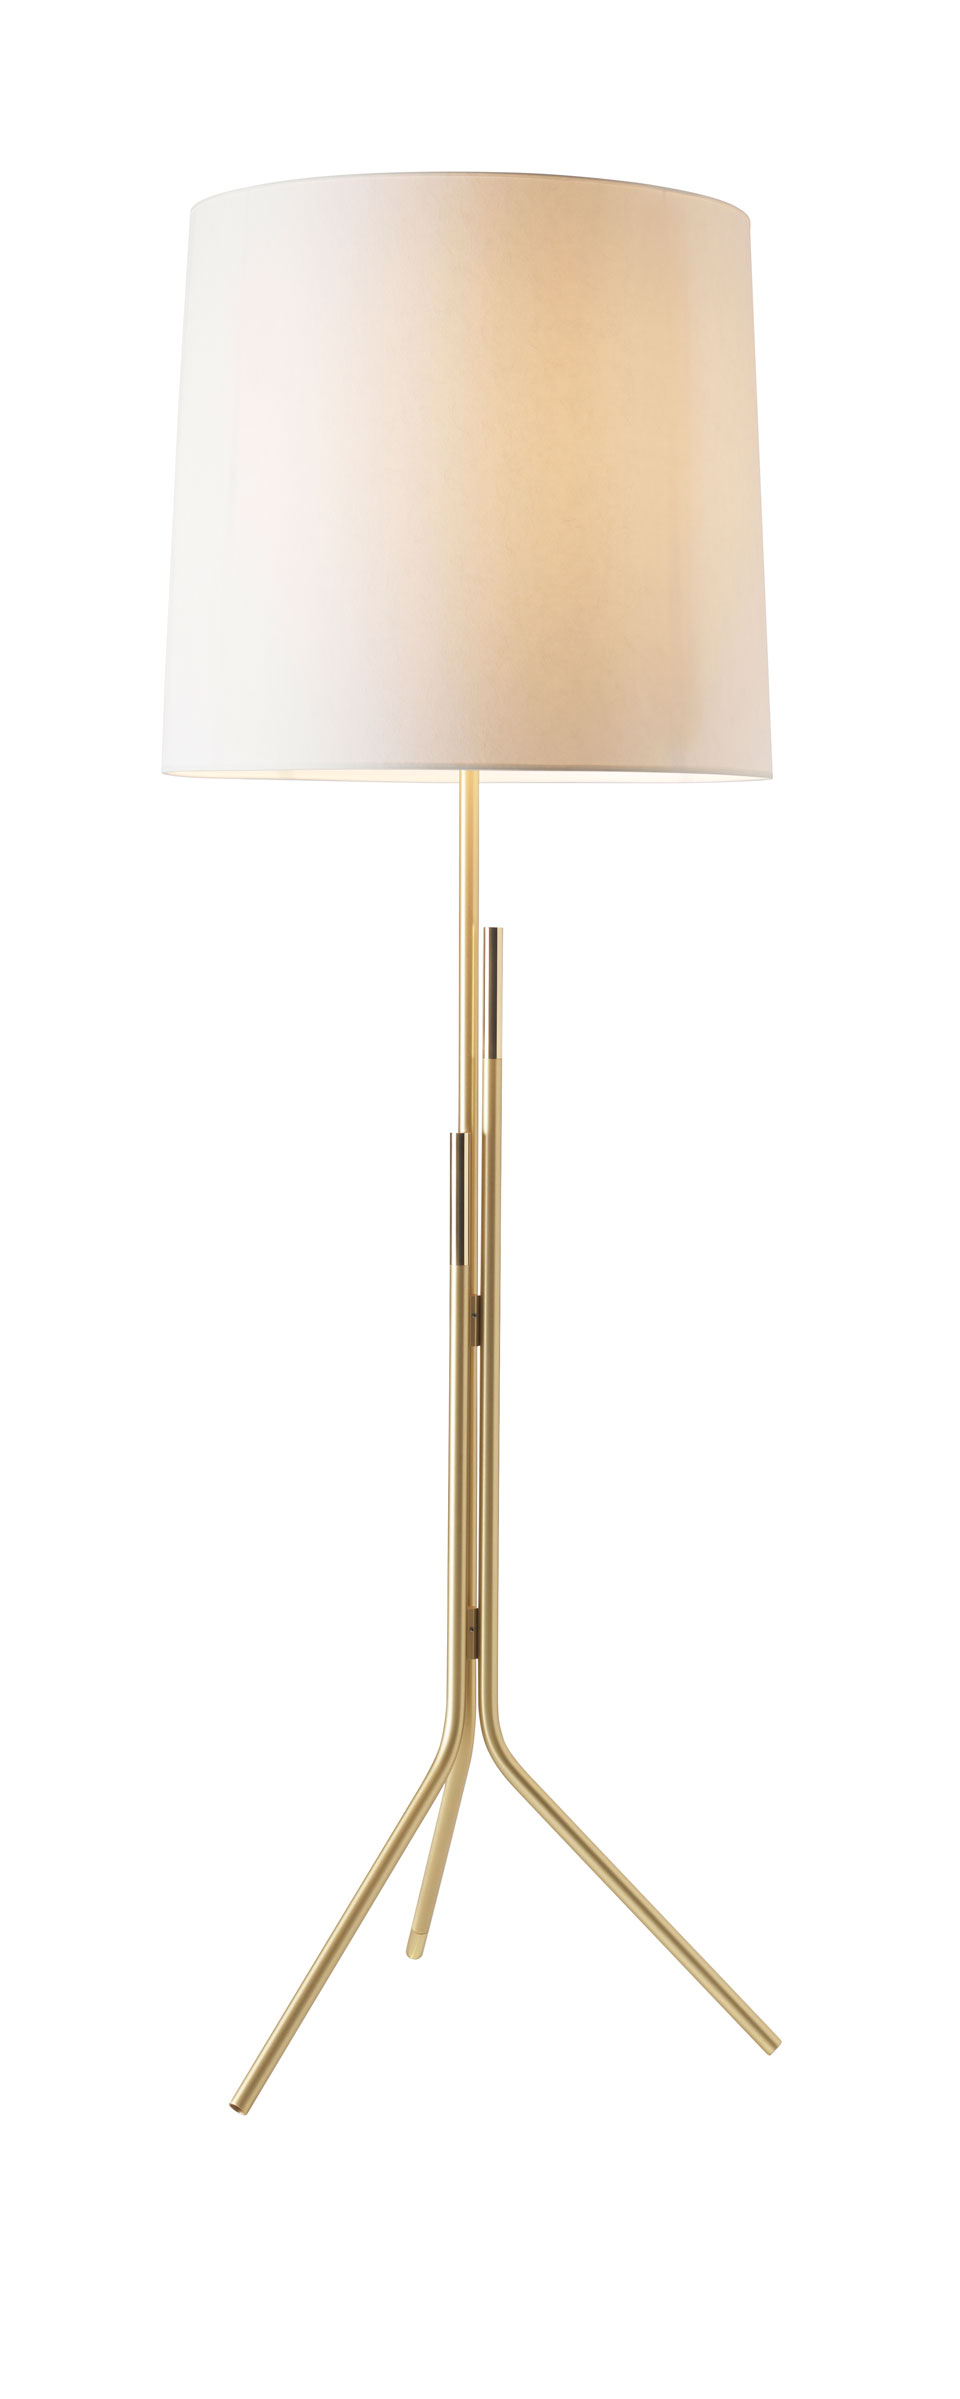 Contemporary Floor Lamp Brass Stand Cylindrical Shade In White Drop Paper Design Herv Langlais intended for sizing 960 X 2399